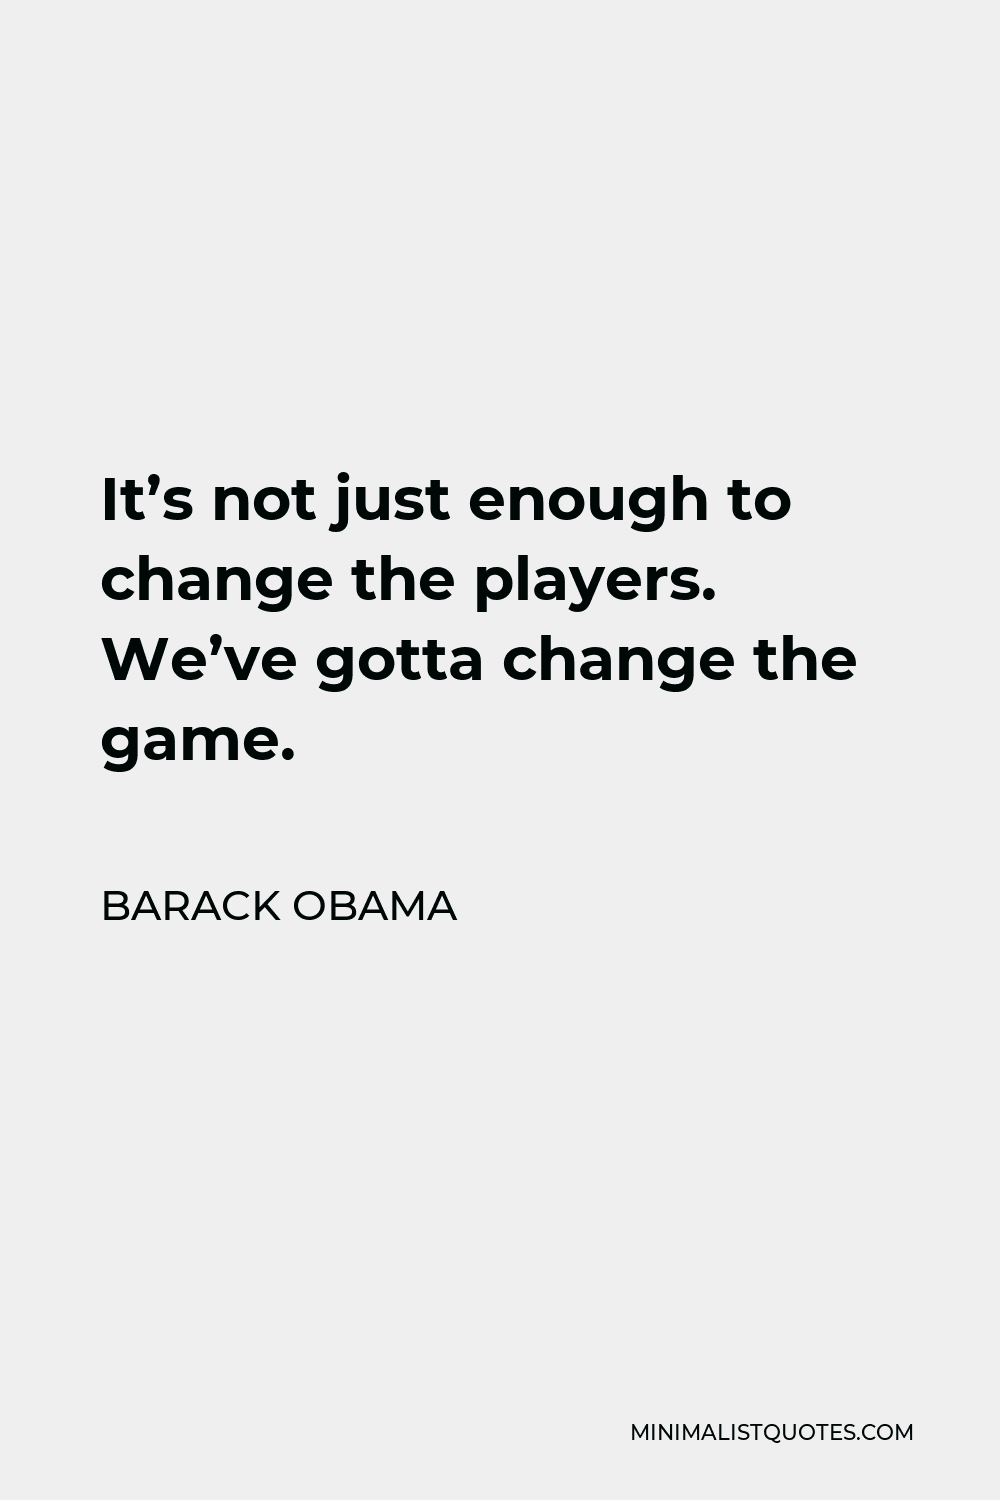 Barack Obama Quote - It’s not just enough to change the players. We’ve gotta change the game.